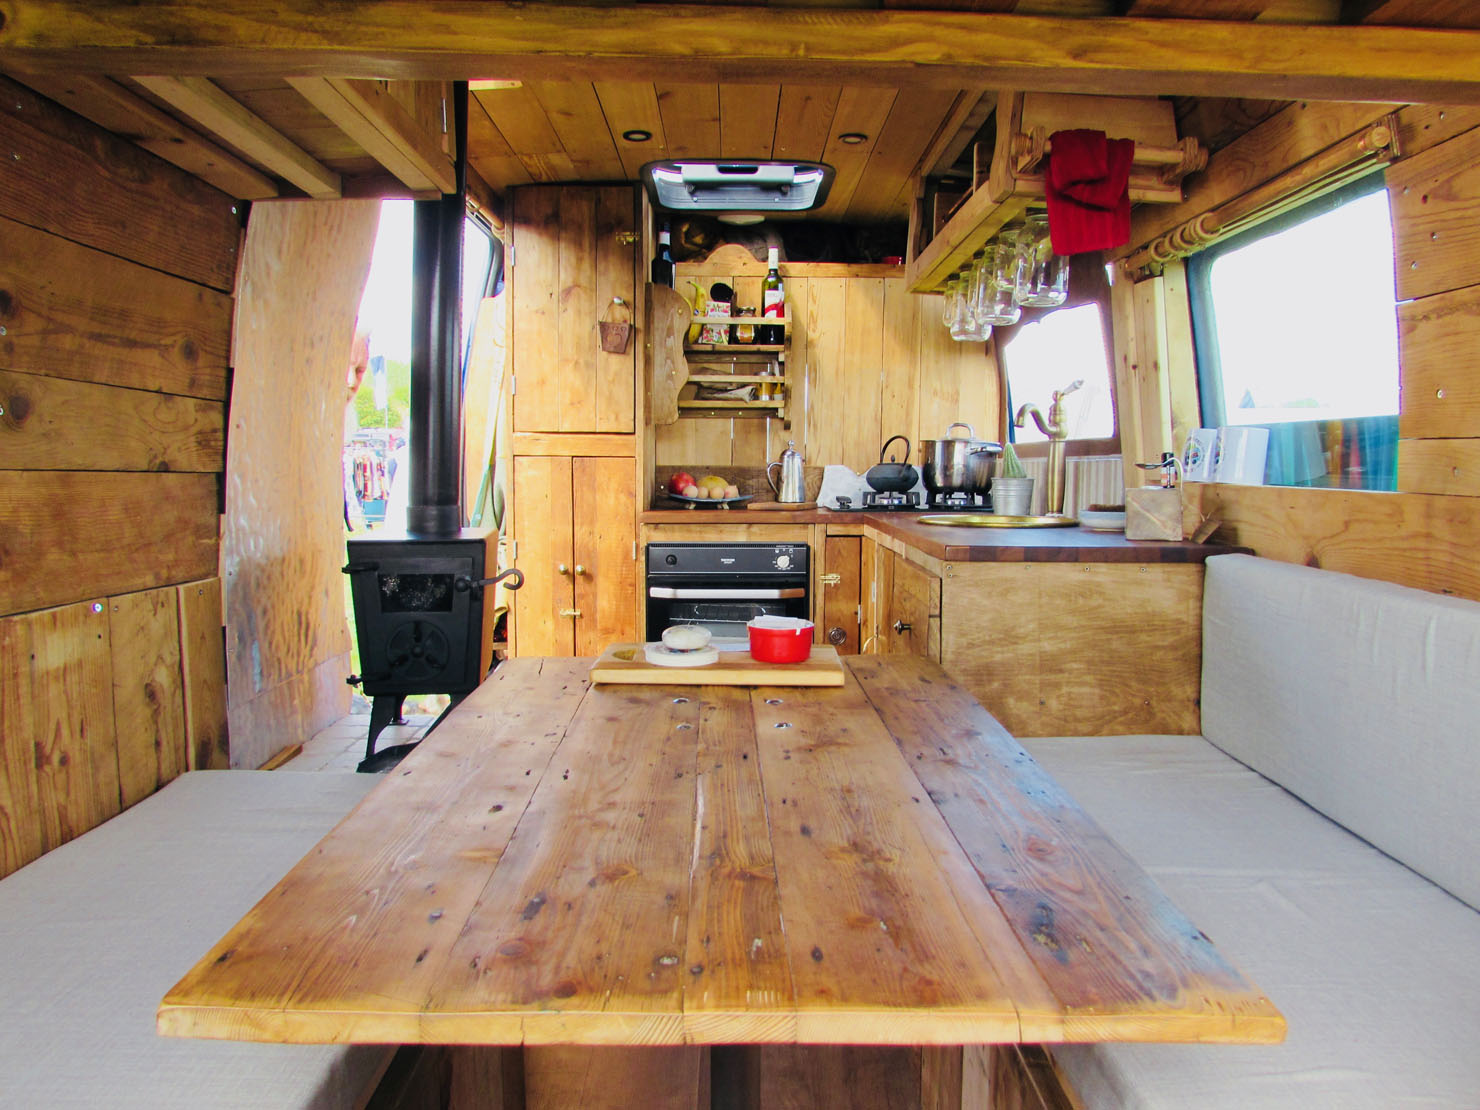 The interior of a rustic wooden camper van includes a central wooden table with benches on either side, a kitchen area with a stove, sink, and shelves filled with kitchenware. A small wood-burning stove is on the left, and a window on the right allows natural light to illuminate the space.